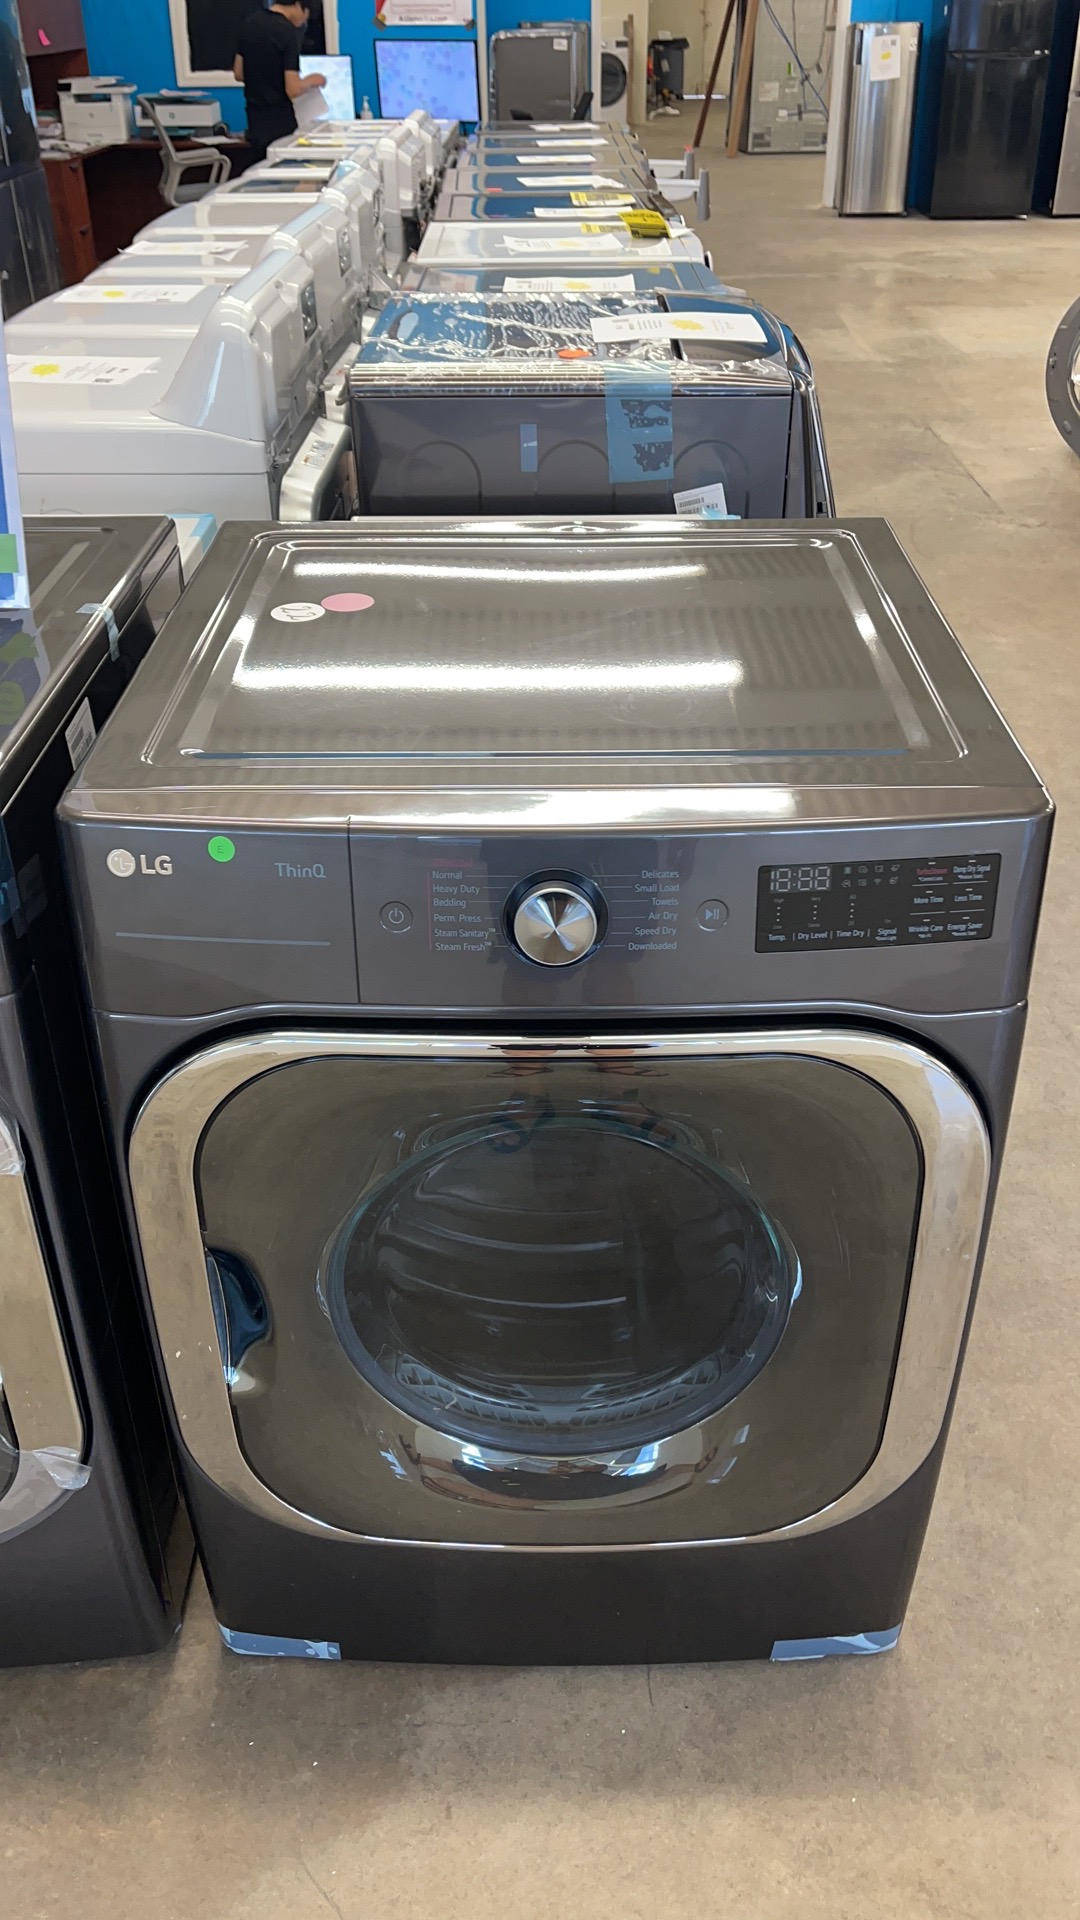 LG 5.2 cu. ft. Mega Capacity Front Load Washer and 9.0 cu. ft. Mega  Capacity ELECTRIC Dryer with Built-In Intelligence